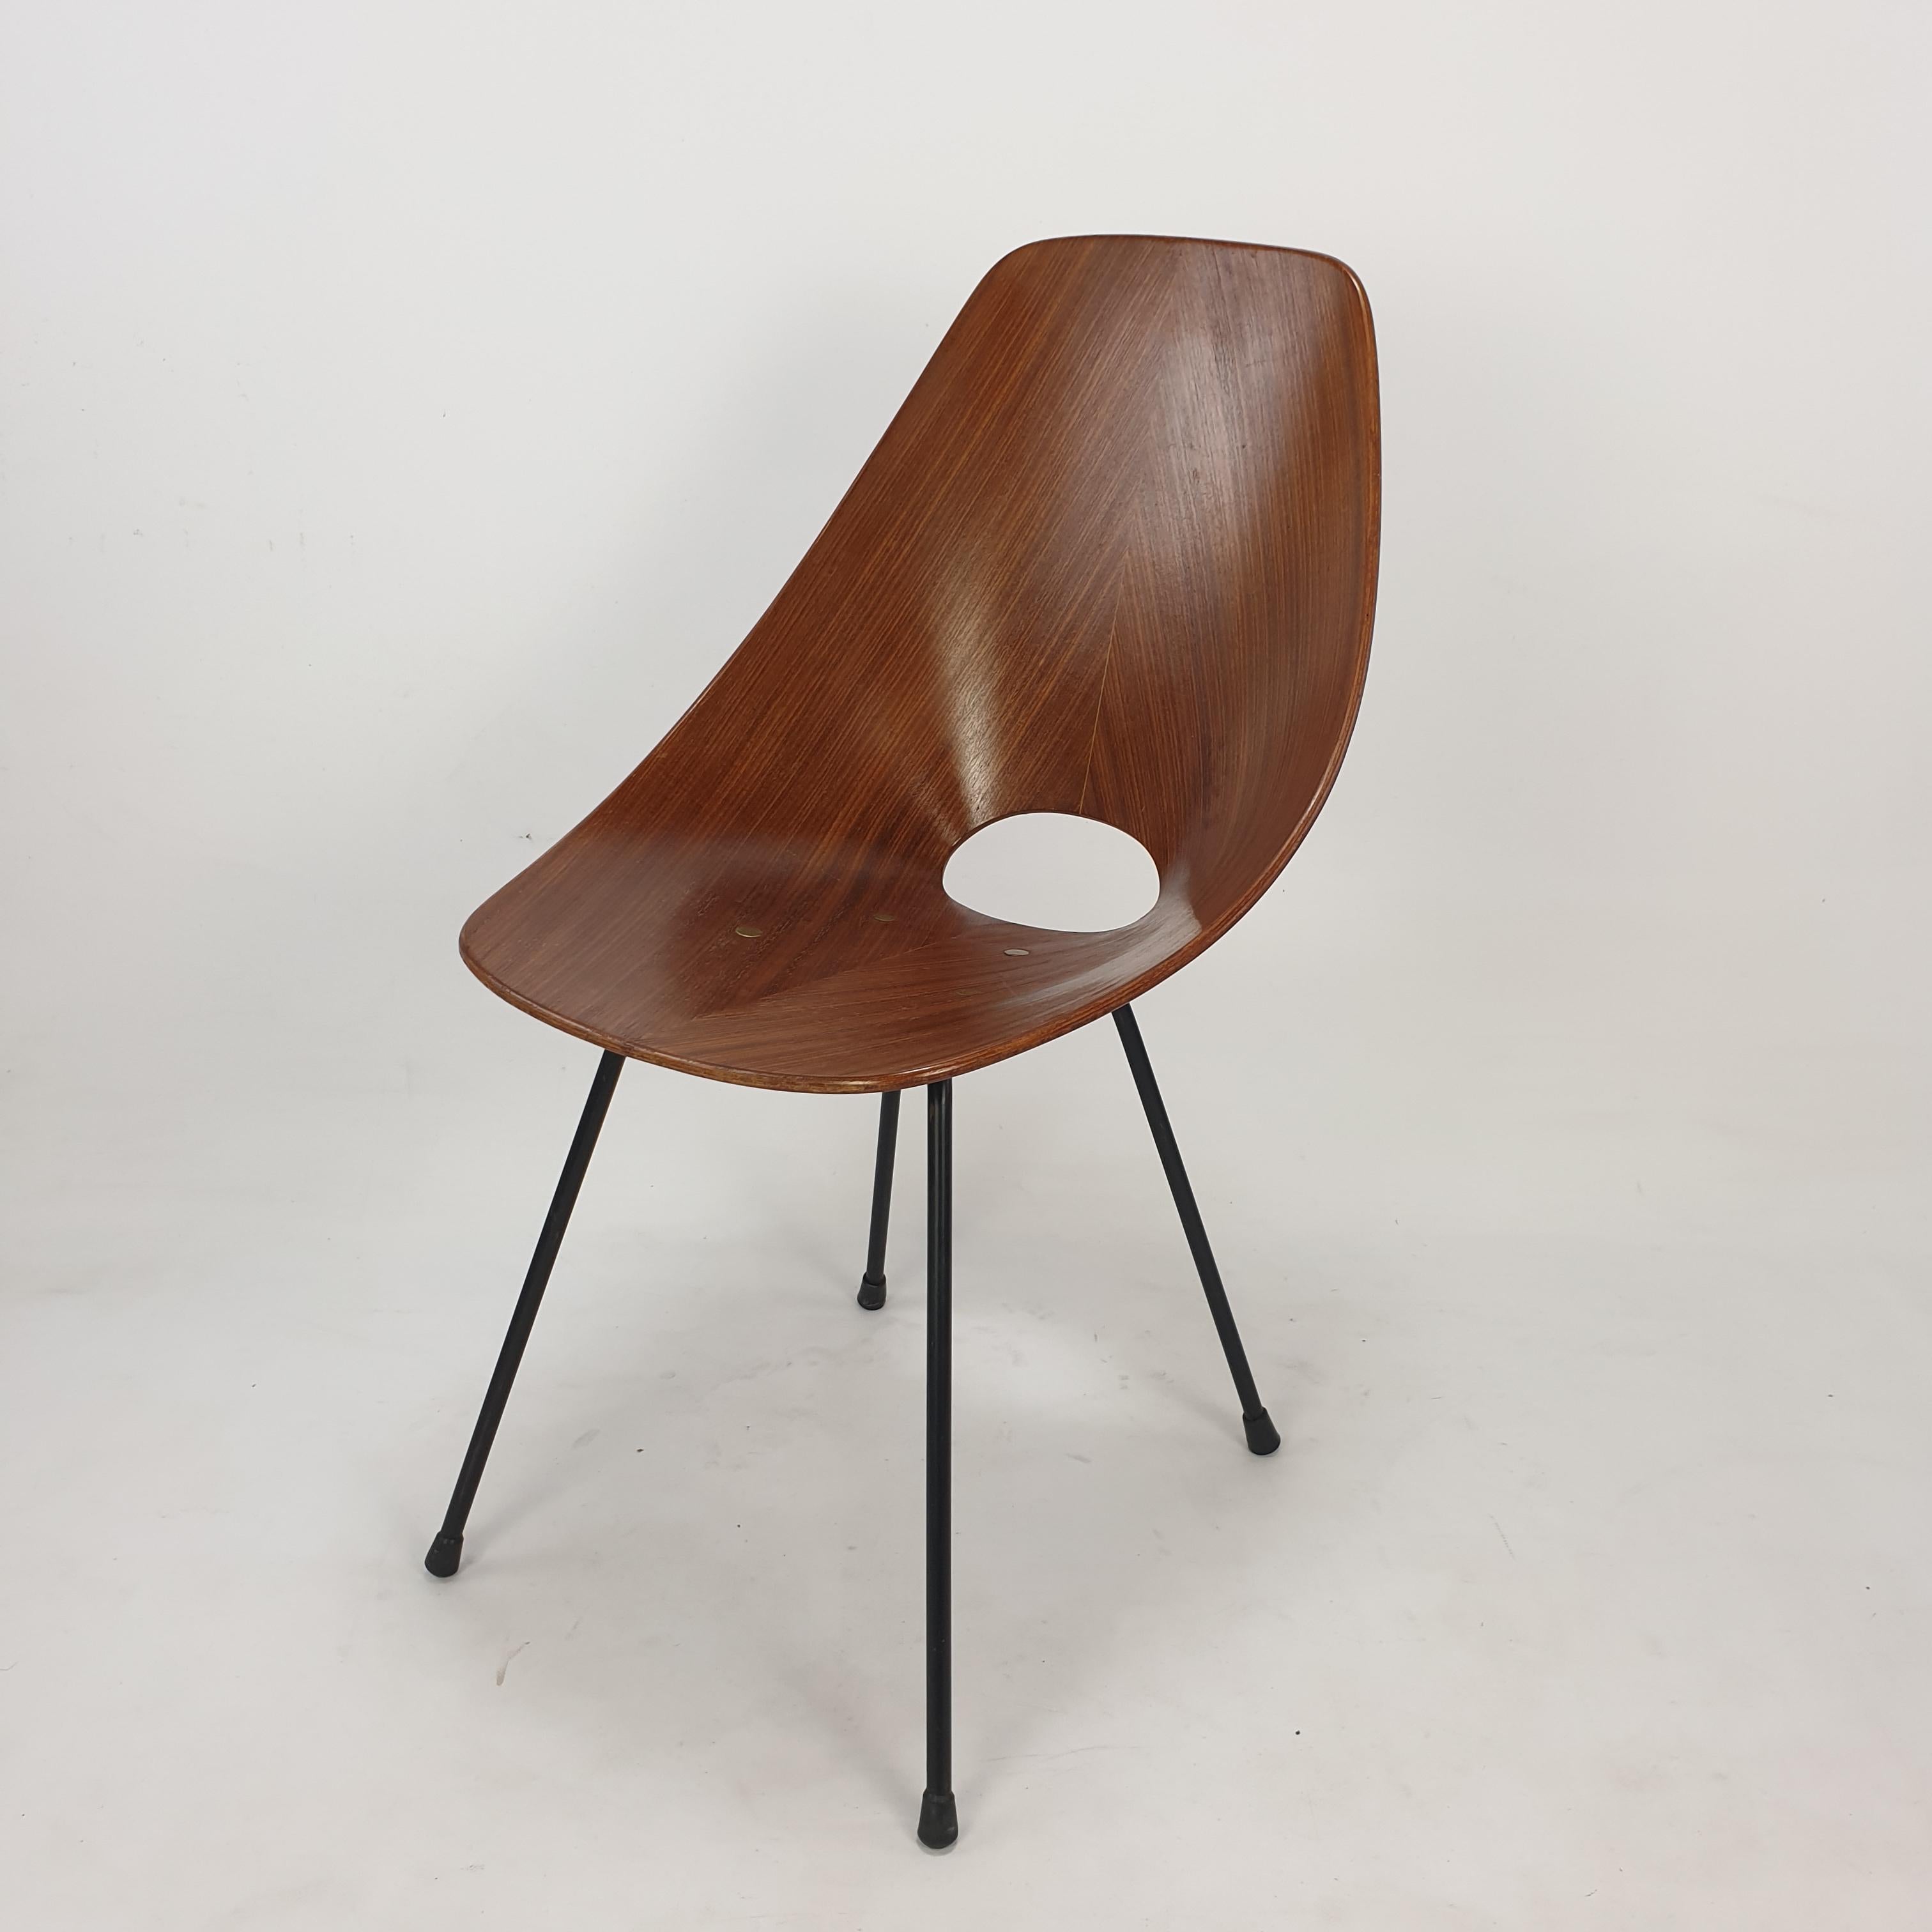 Very beautiful Italian ‘Medea’ chair designed by Vittorio Nobili for Fratelli Tagliabue in 1955. 

Molded teak wood seat supported by black steel legs, accented with brass hardware. 

A perfect representation of the organic modern style. 
The